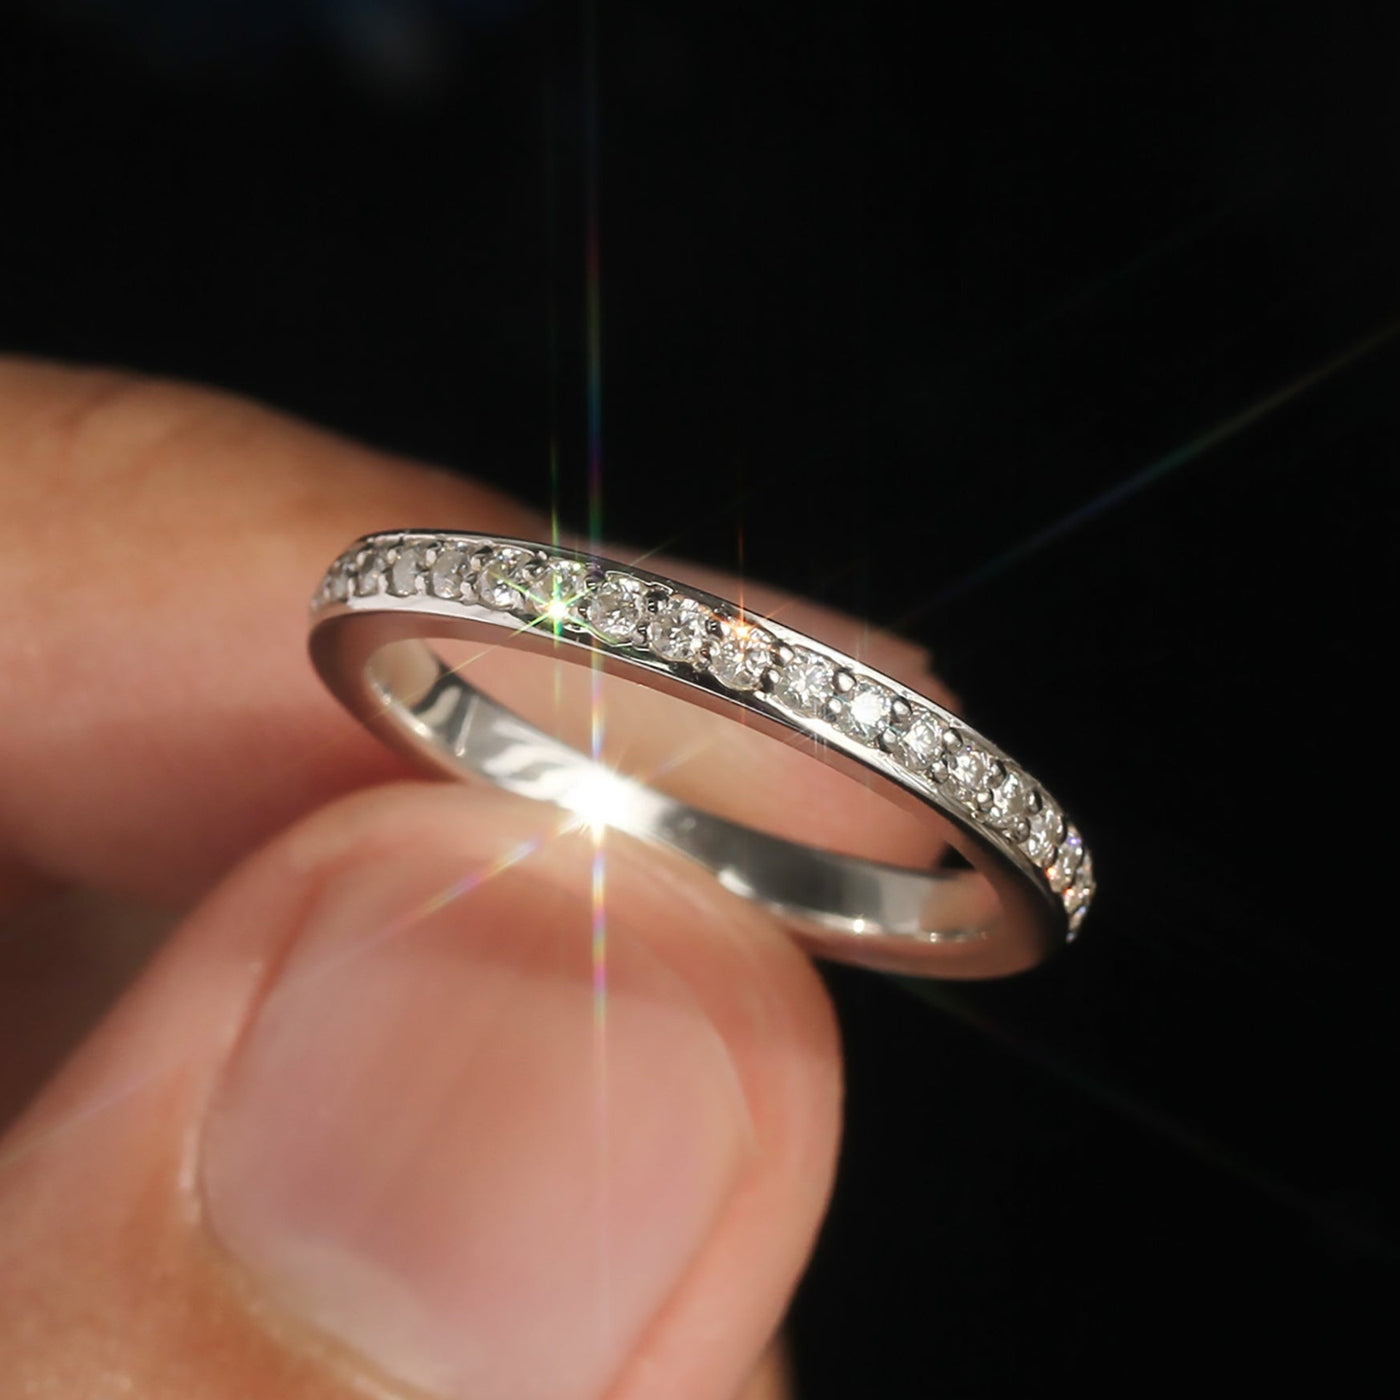 Infinity Delicacy 2mm Full Eternity Ring